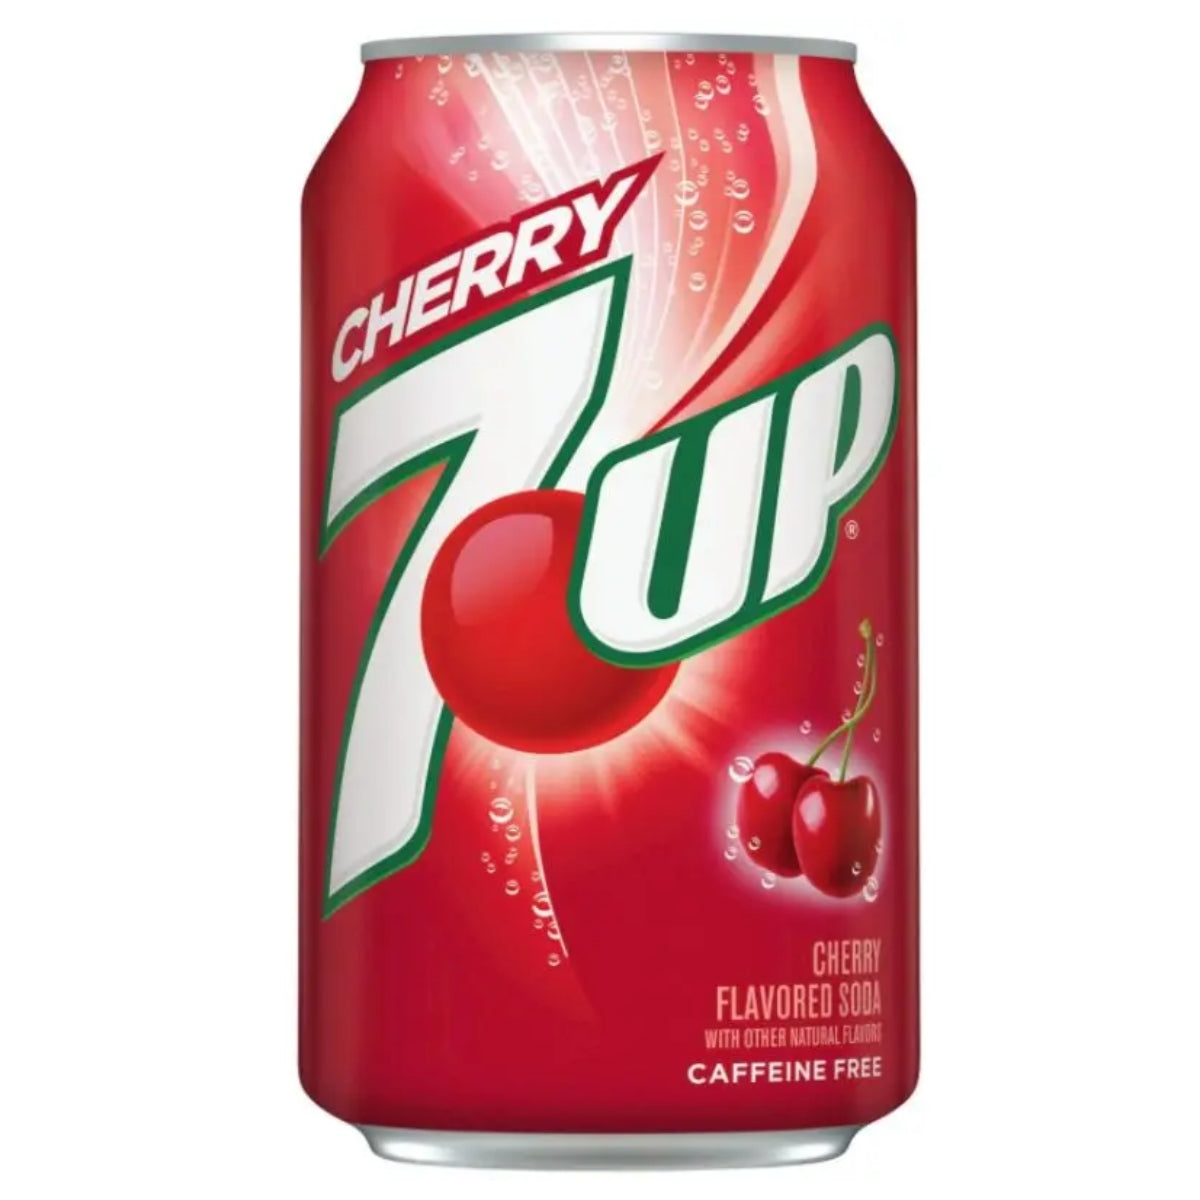 A 355ml can of 7up - Cherry Can with a red background. The can features the brand logo and a picture of cherries. The text indicates it is caffeine free.